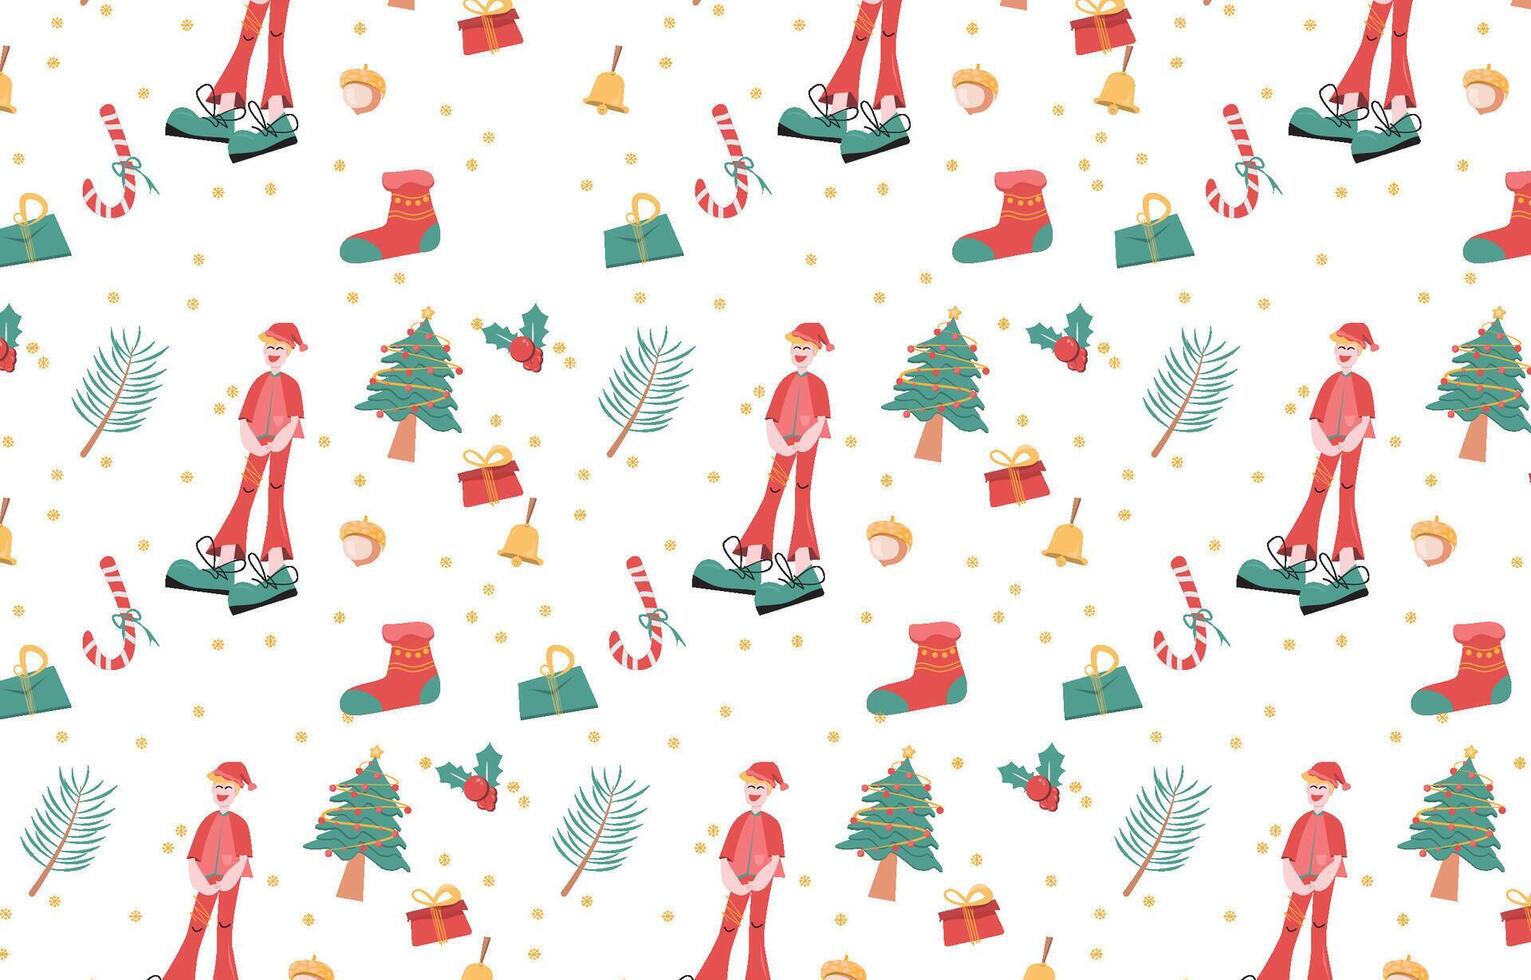 Christmas elements with drawing Modern cartoon style with Christmas tree, bells, pine, Envelope, snow, socks, and candy cane cartoon style pattern texture background. Flat vector illustration.